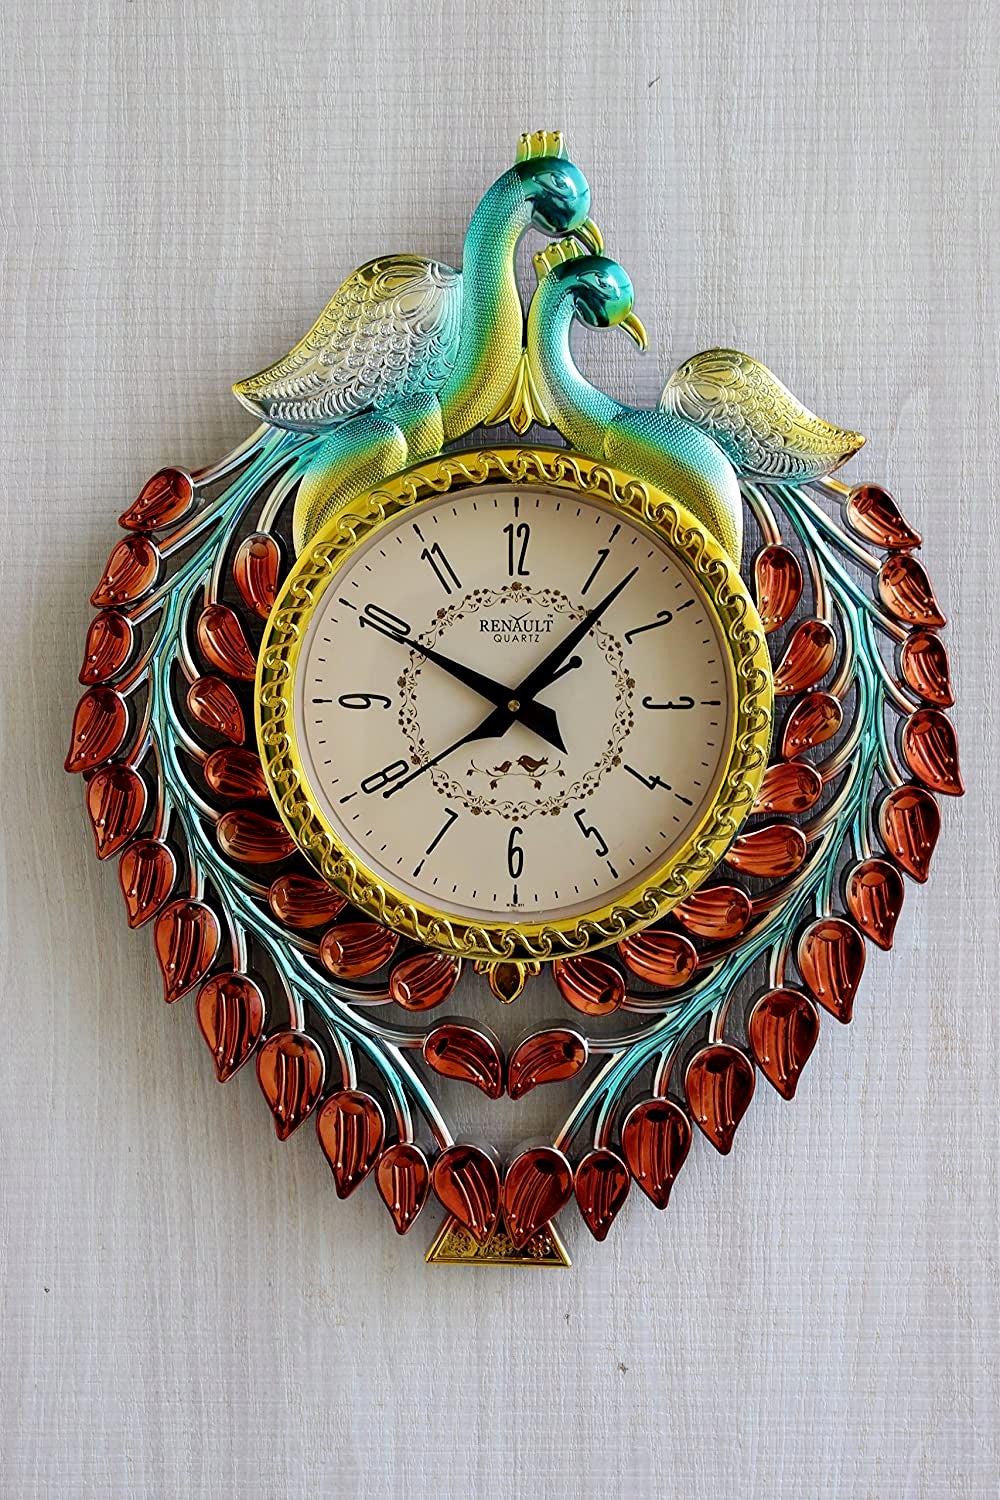 FunkyTradition Multicolor Beautiful Peacock Wall Clock , Wall Watch , Wall Decor for Home Office Decor and Gifts 50 CM Tall